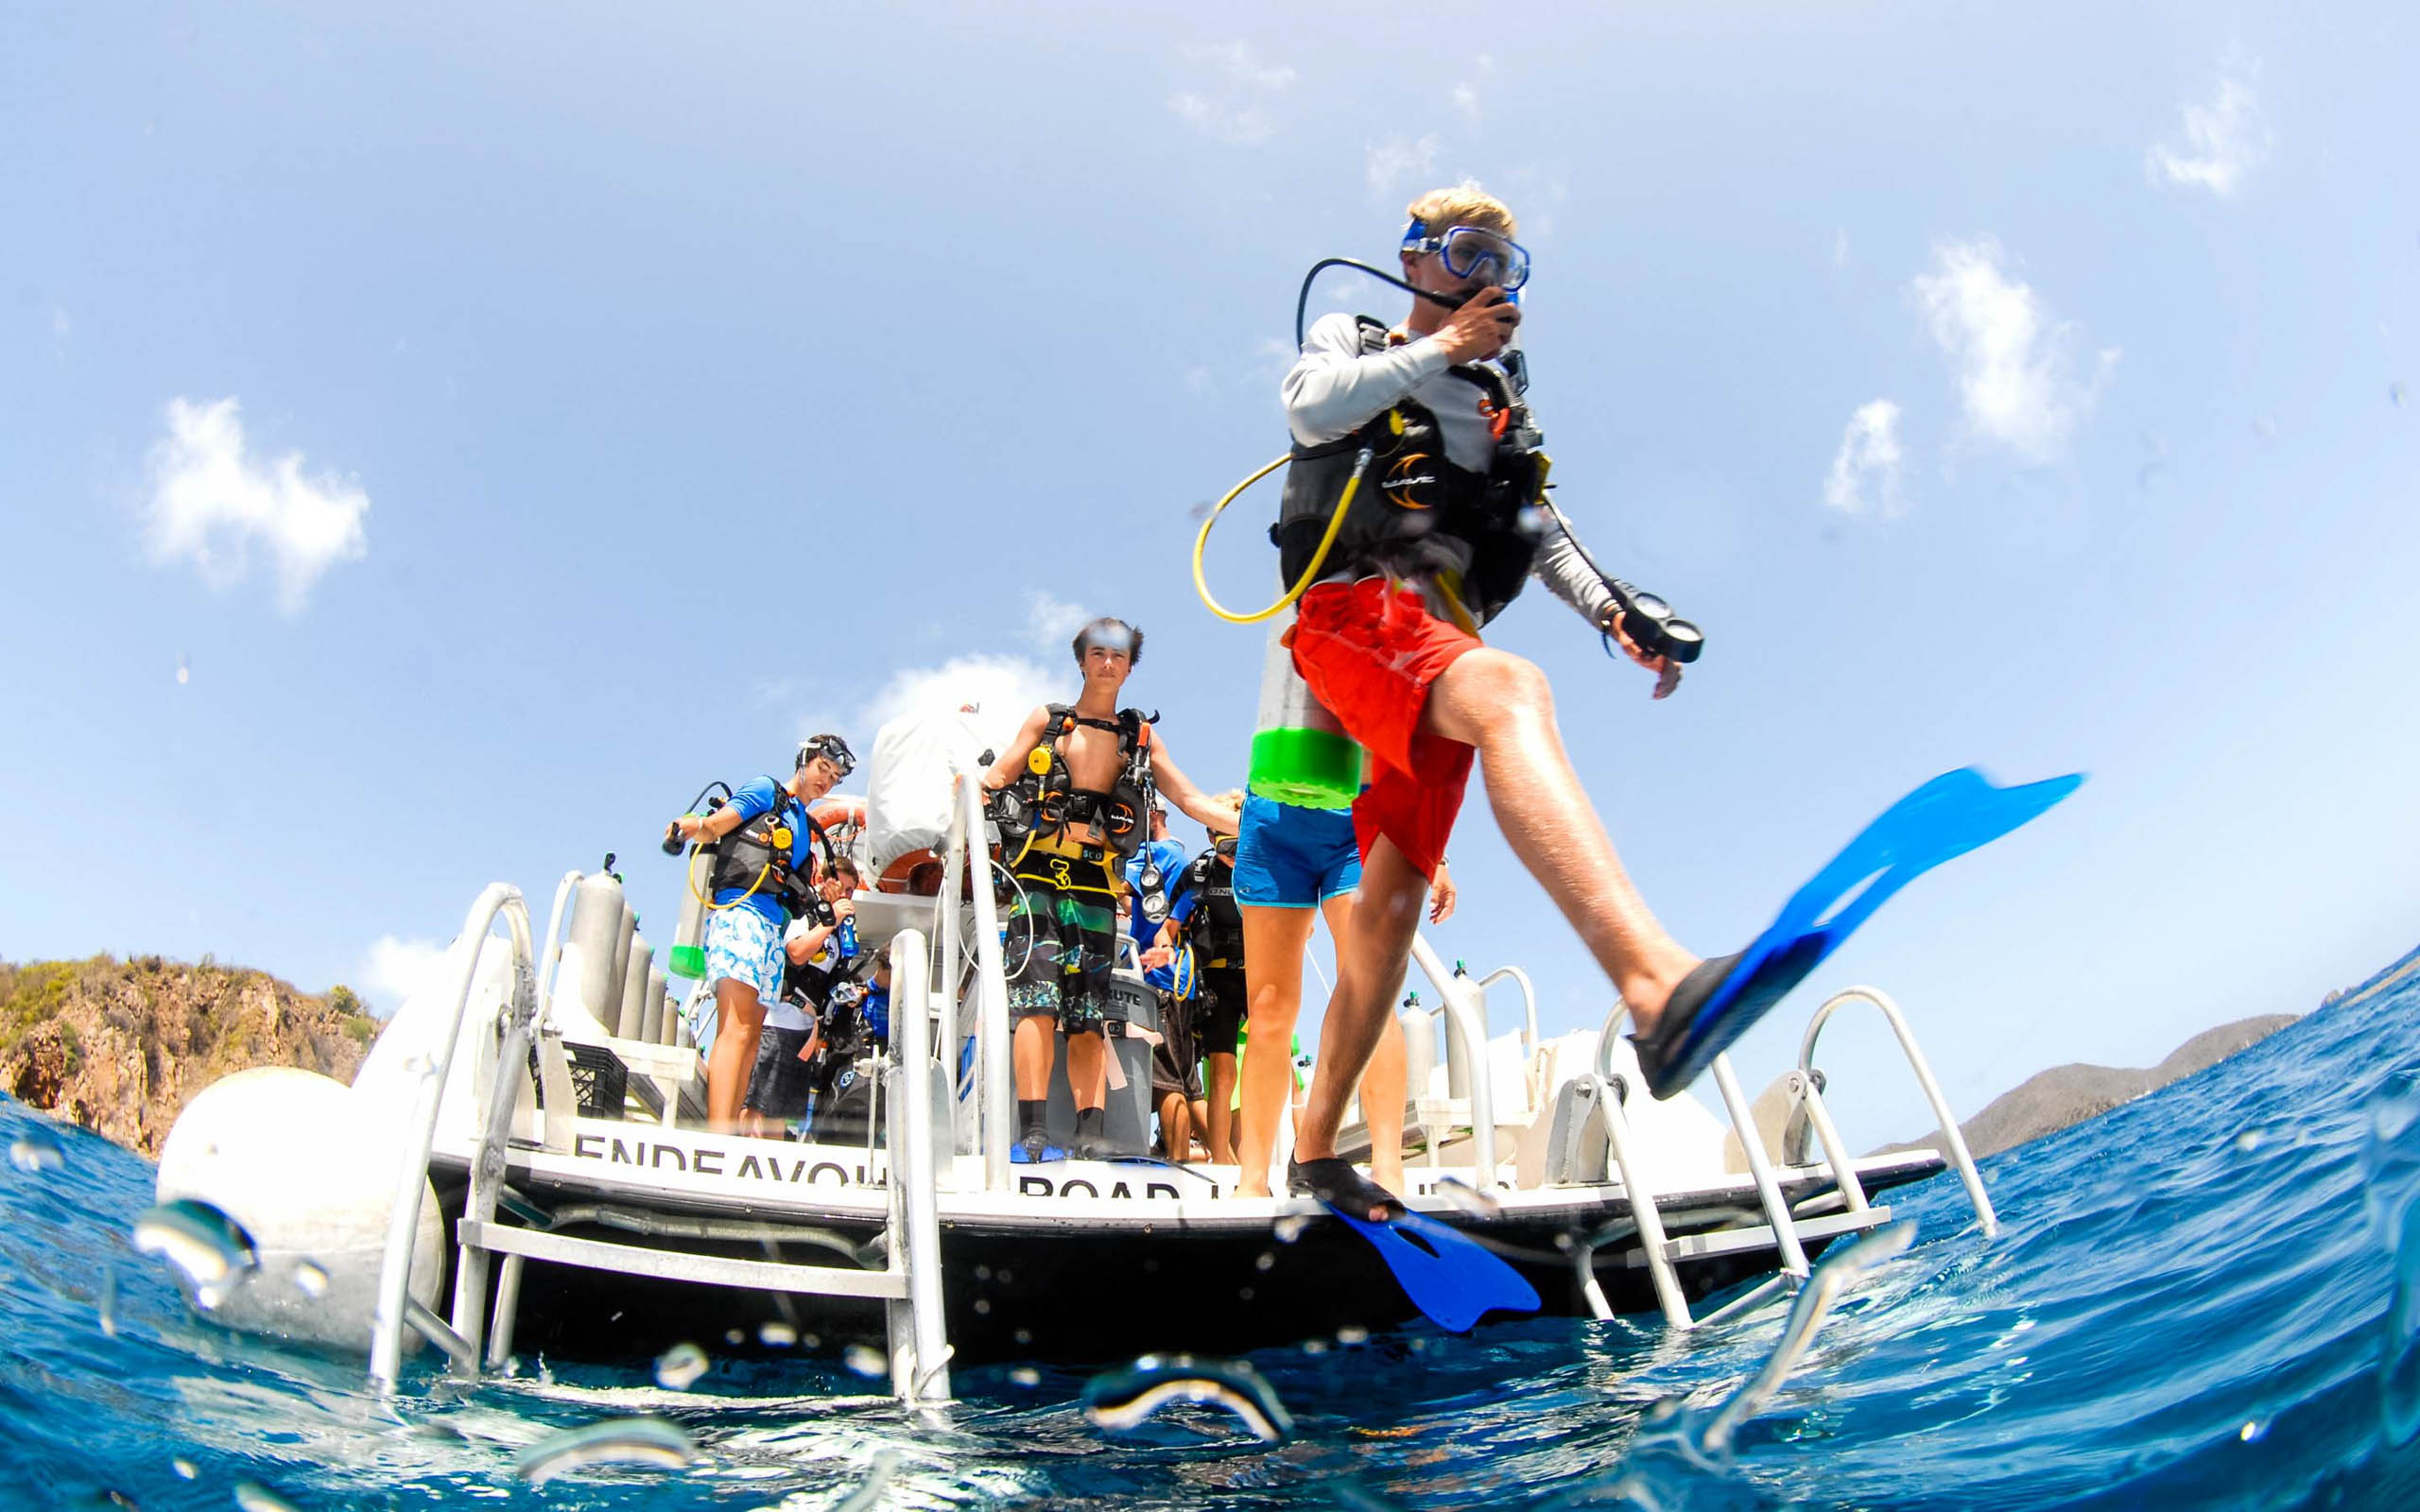 A group of people scuba diving on a boat.